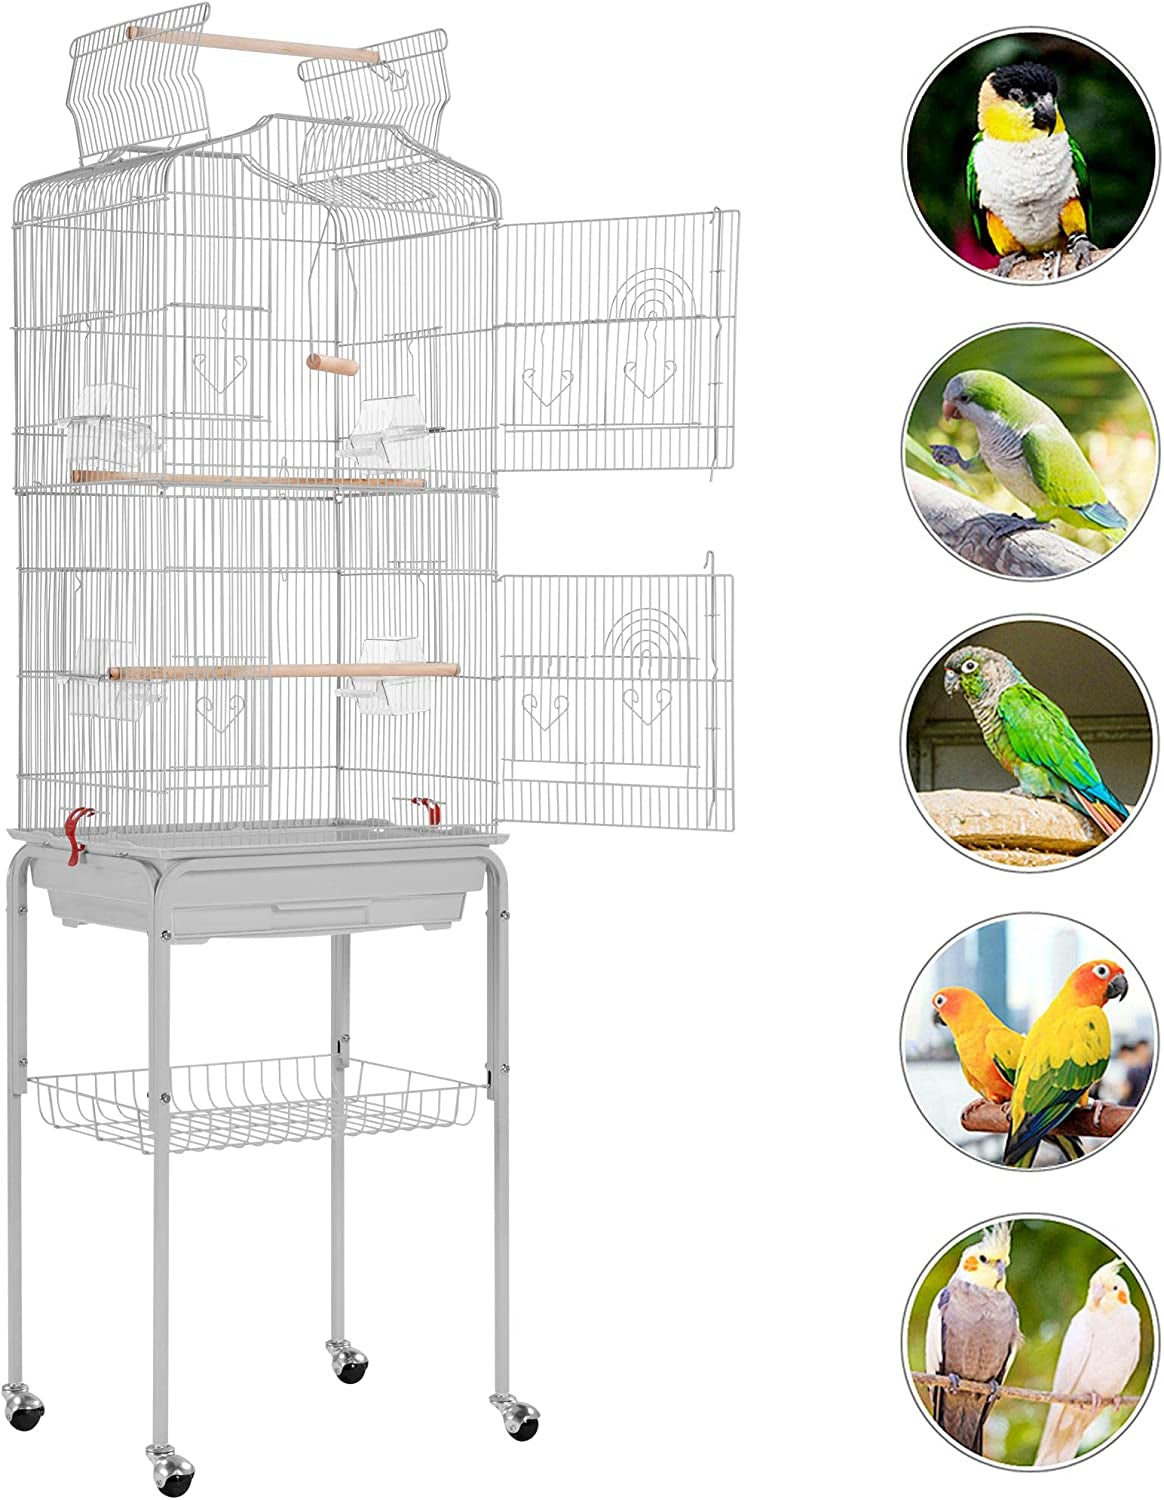 64Inch Height Open Top Bird Cage Metal Parrot Cage W/Detachable Rolling Stand for Medium Small Parrot Parakeet Birds